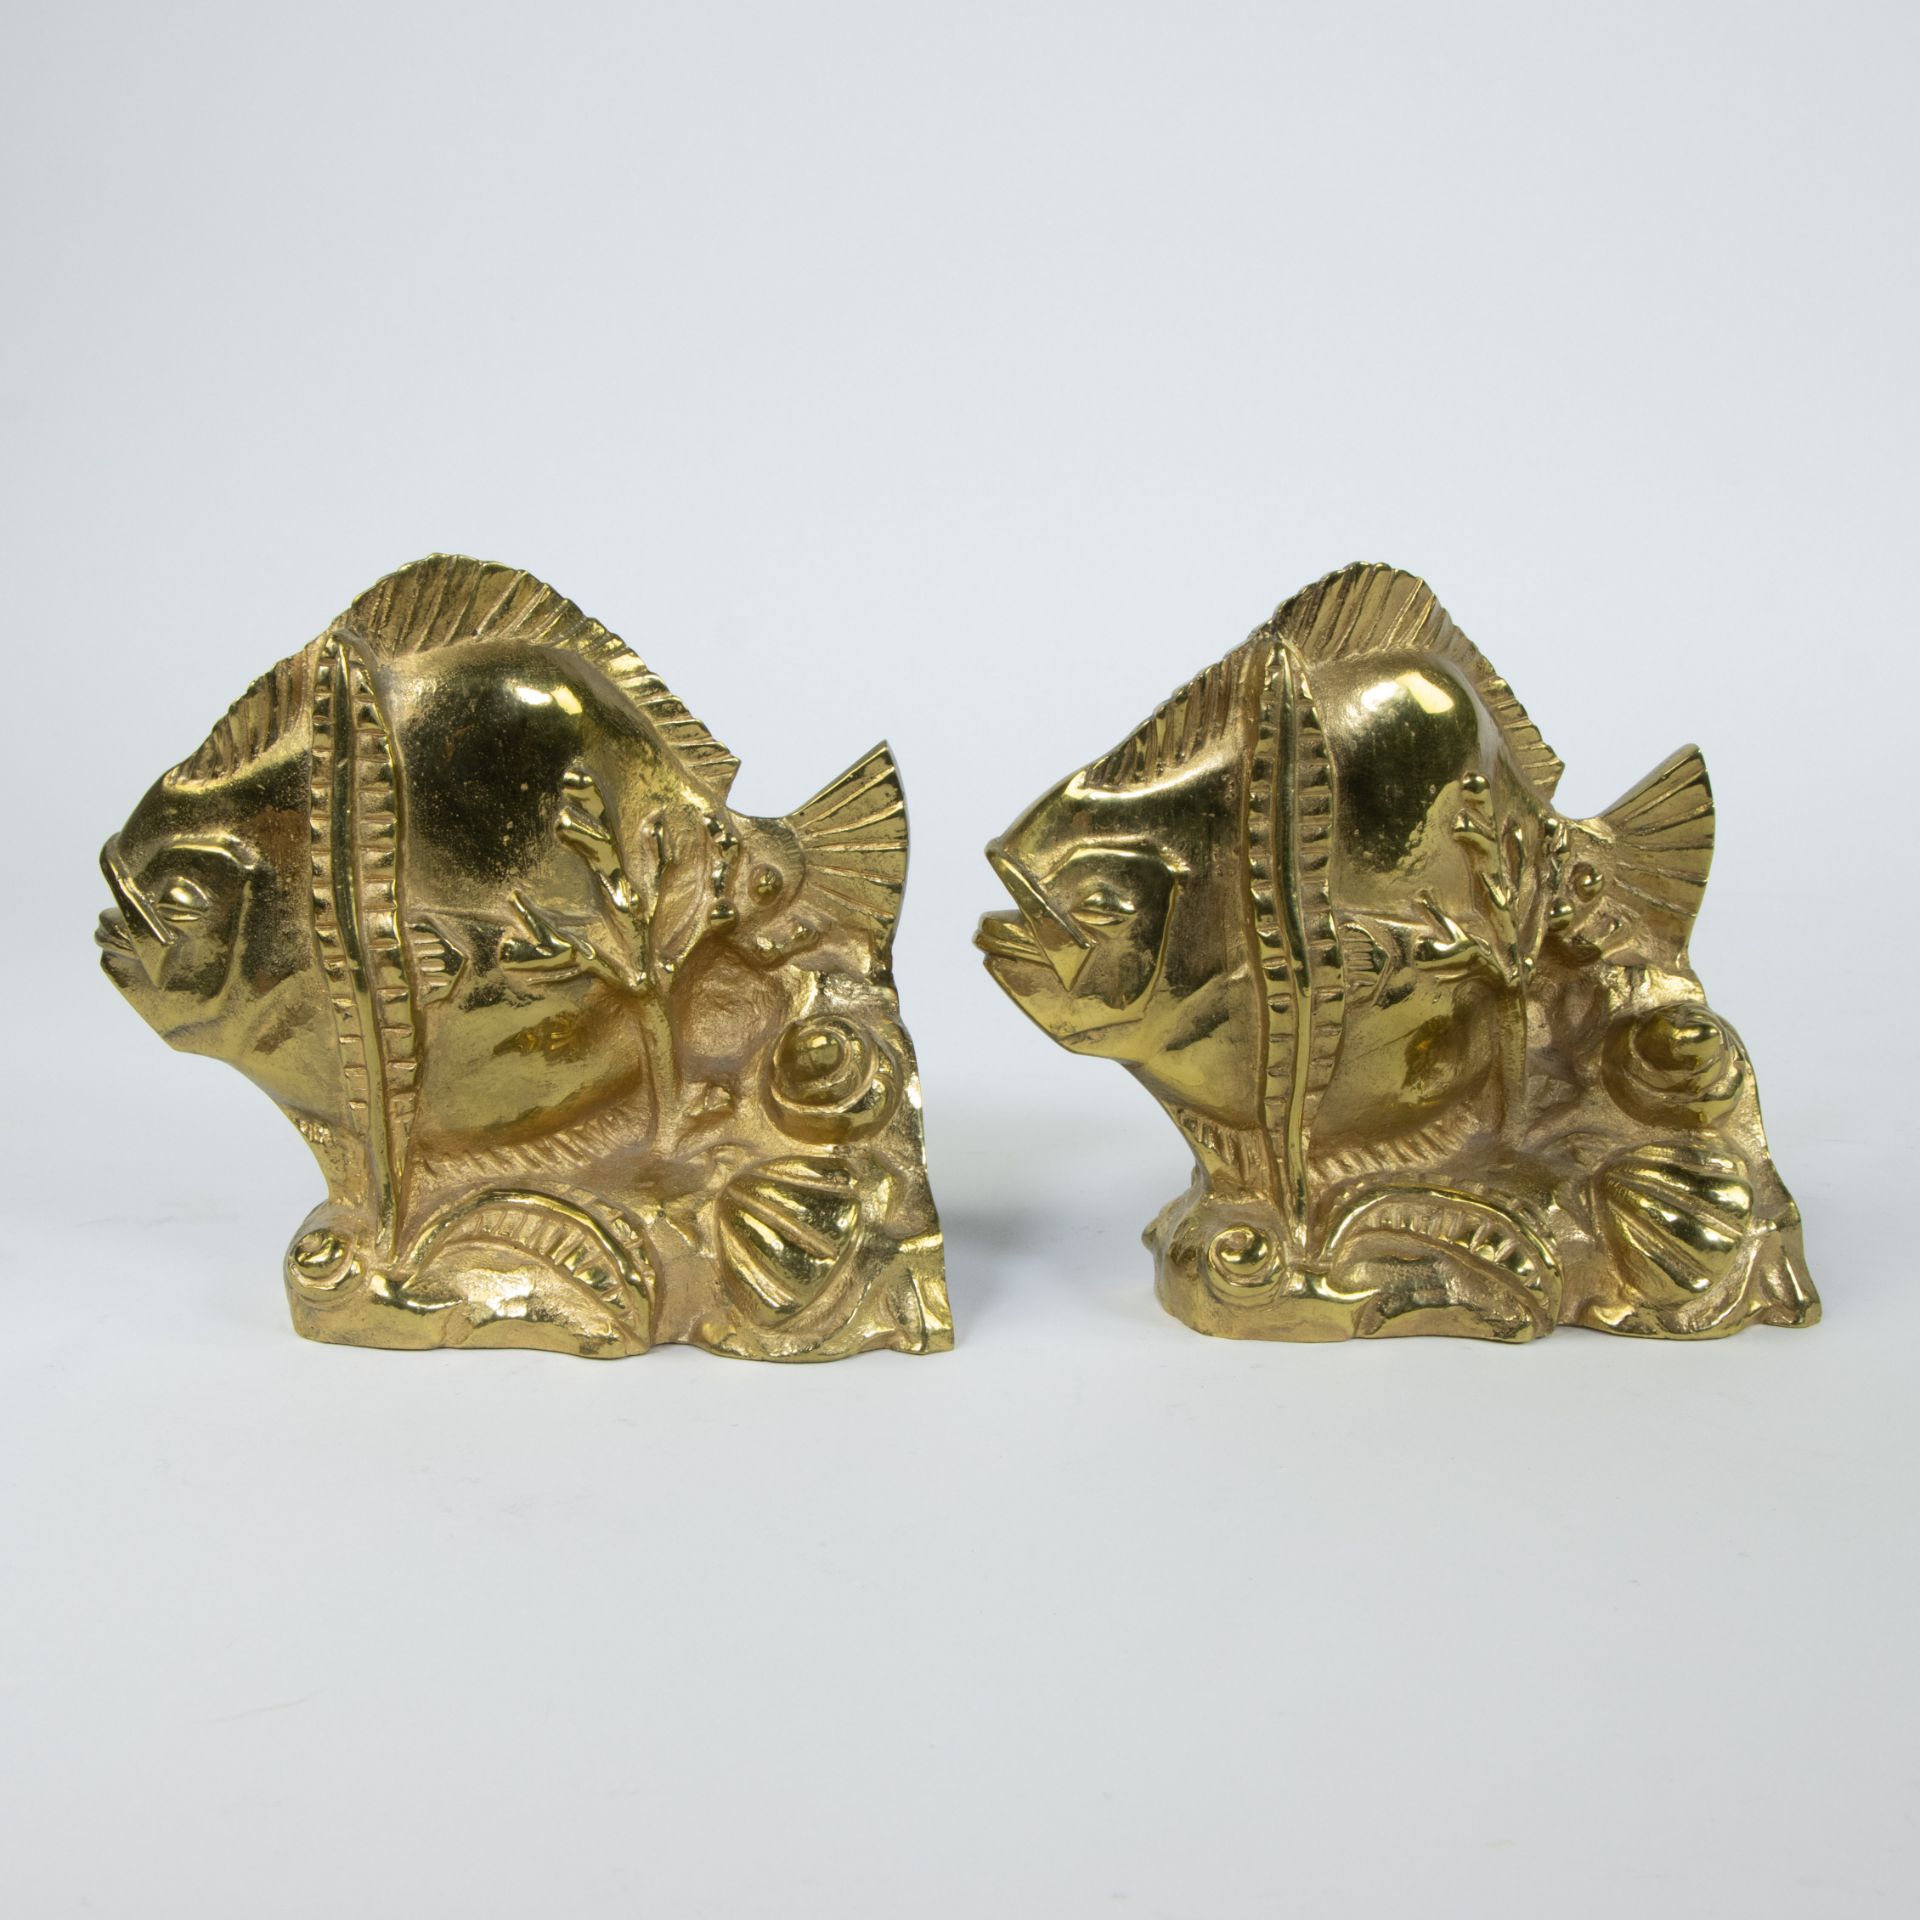 Pair of Art Deco gilded bronze bookends in the shape of fish - Image 3 of 4